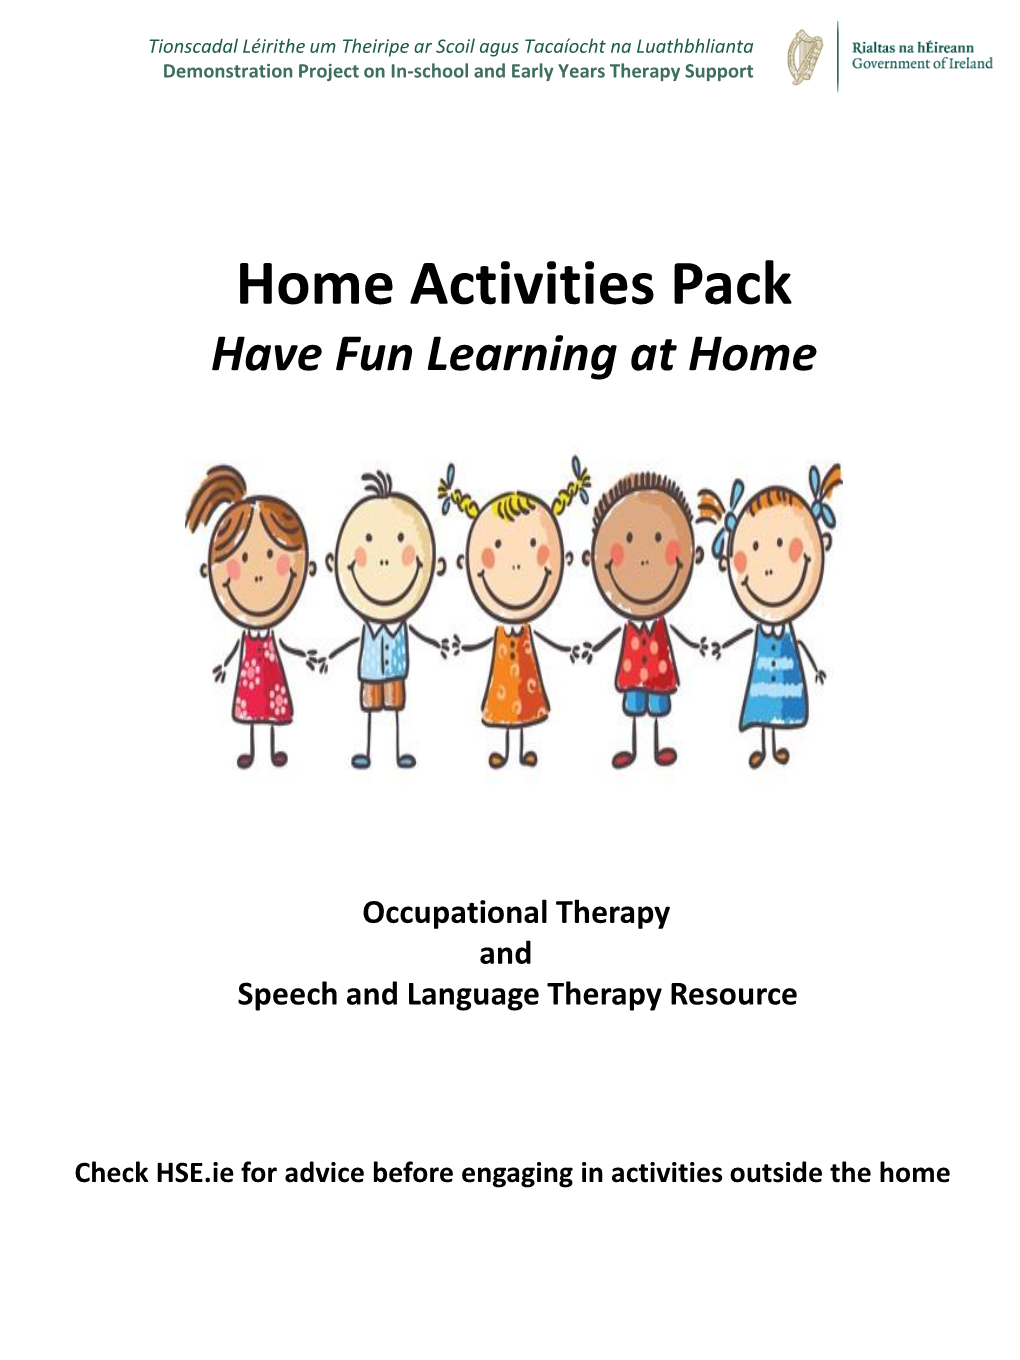 Home Activities Pack Have Fun Learning at Home